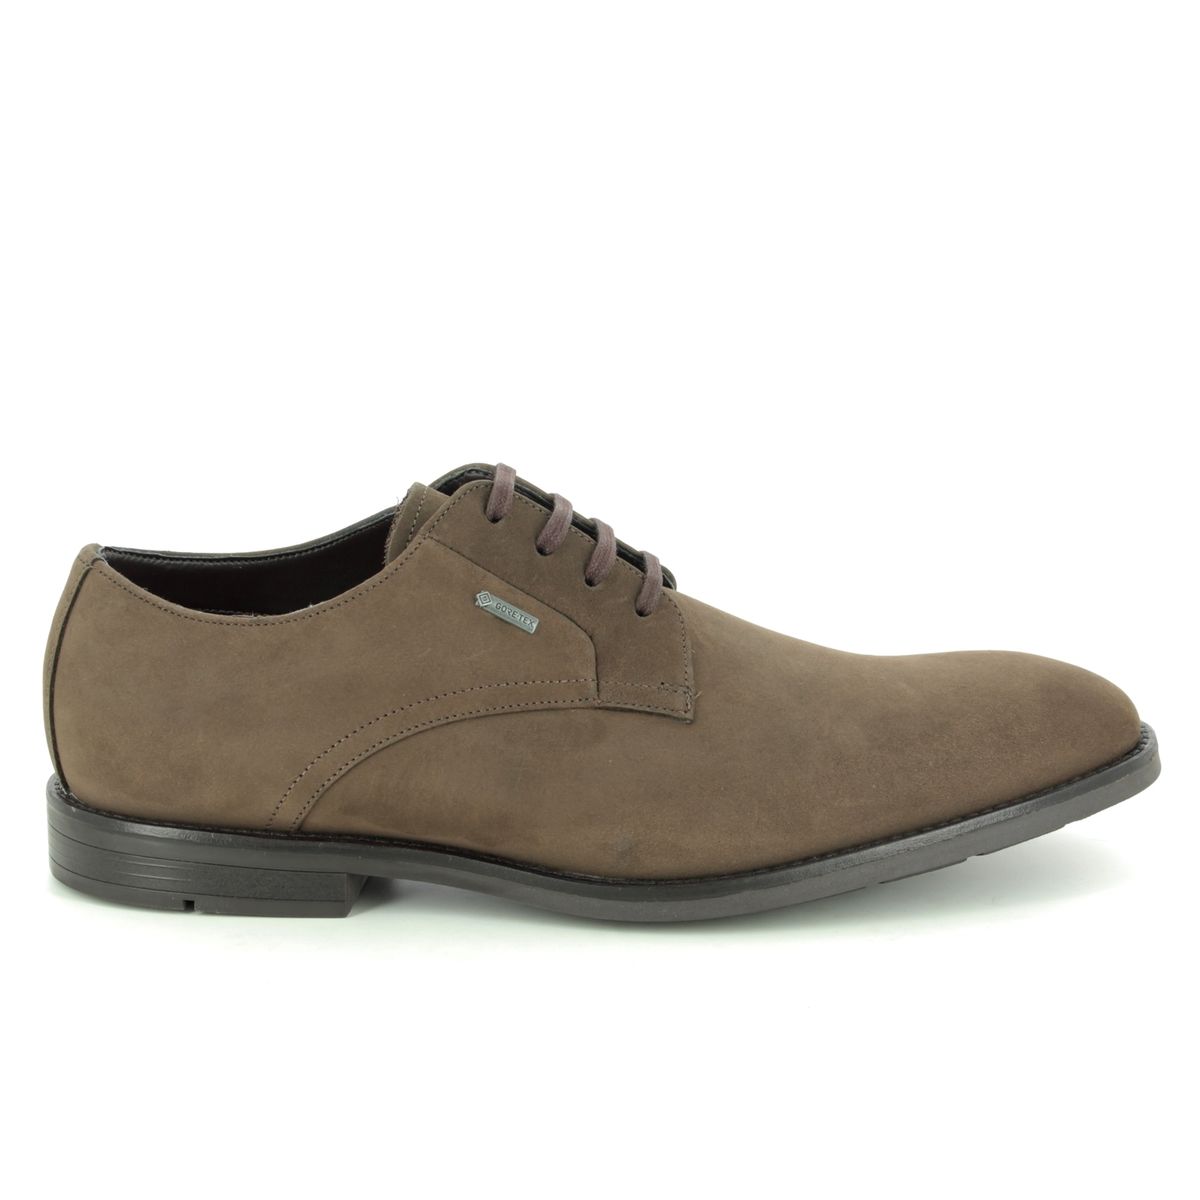 gore tex formal shoes